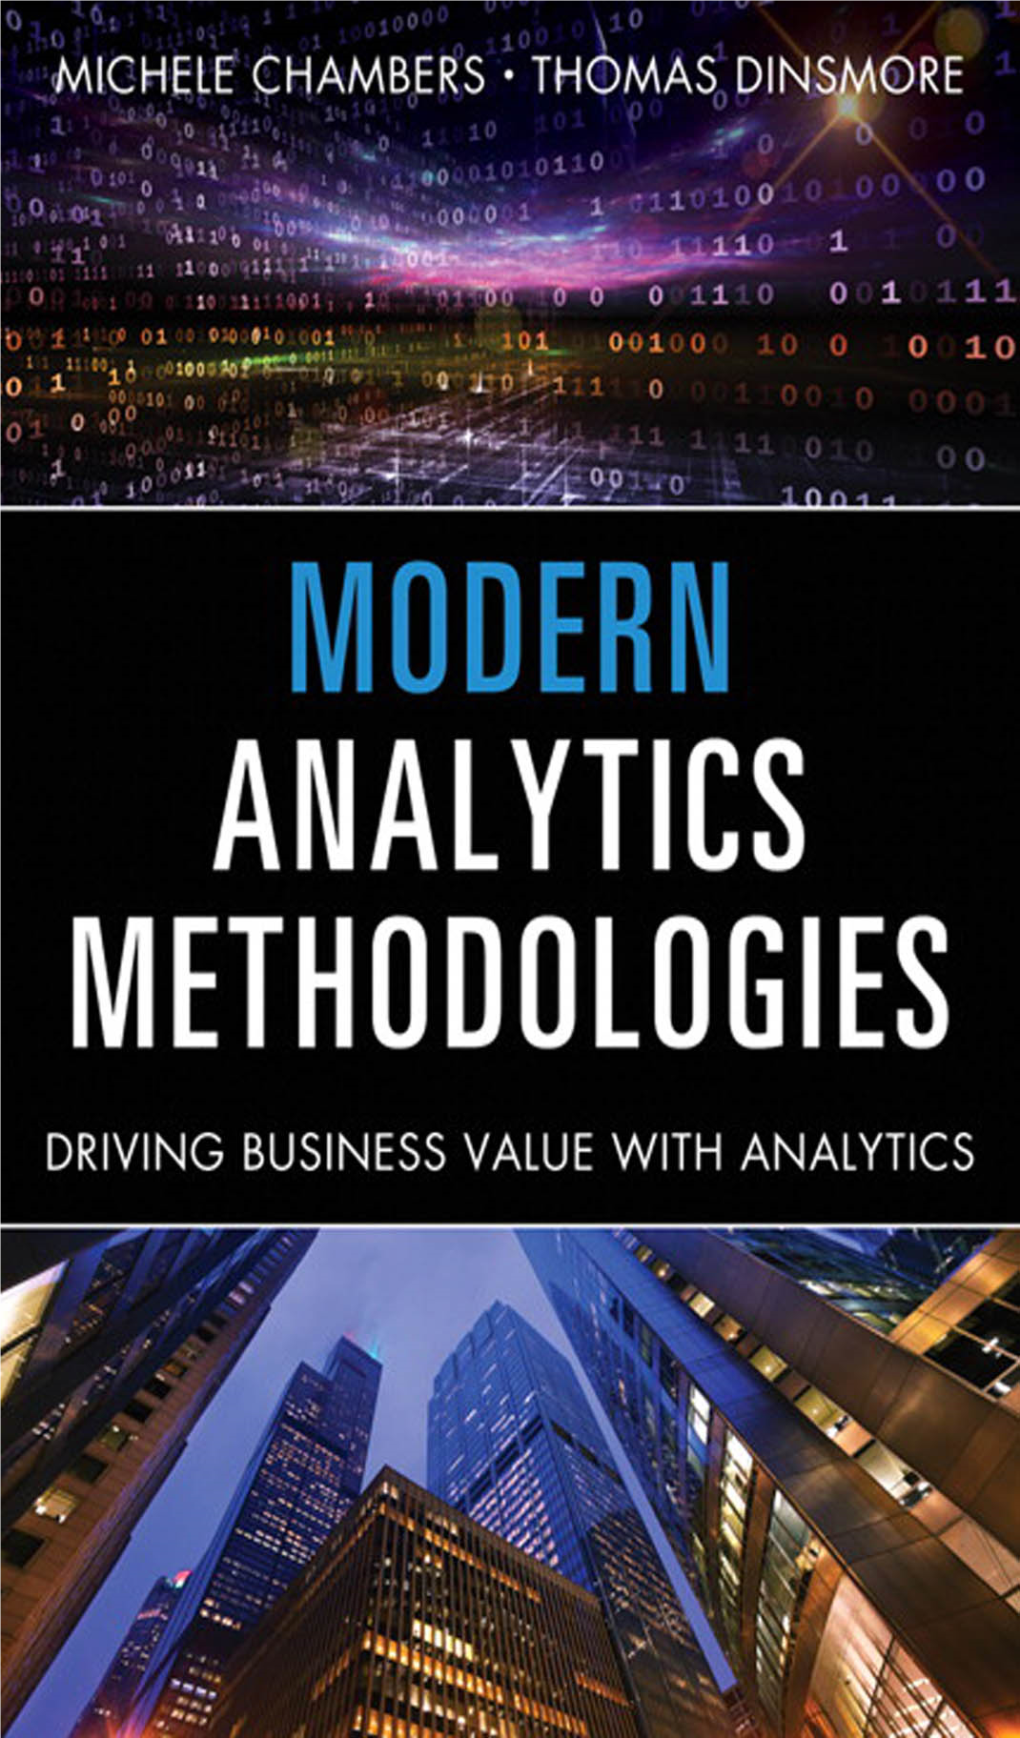 Modern Analytics Methodologies This Page Intentionally Left Blank Modern Analytics Methodologies Driving Business Value with Analytics